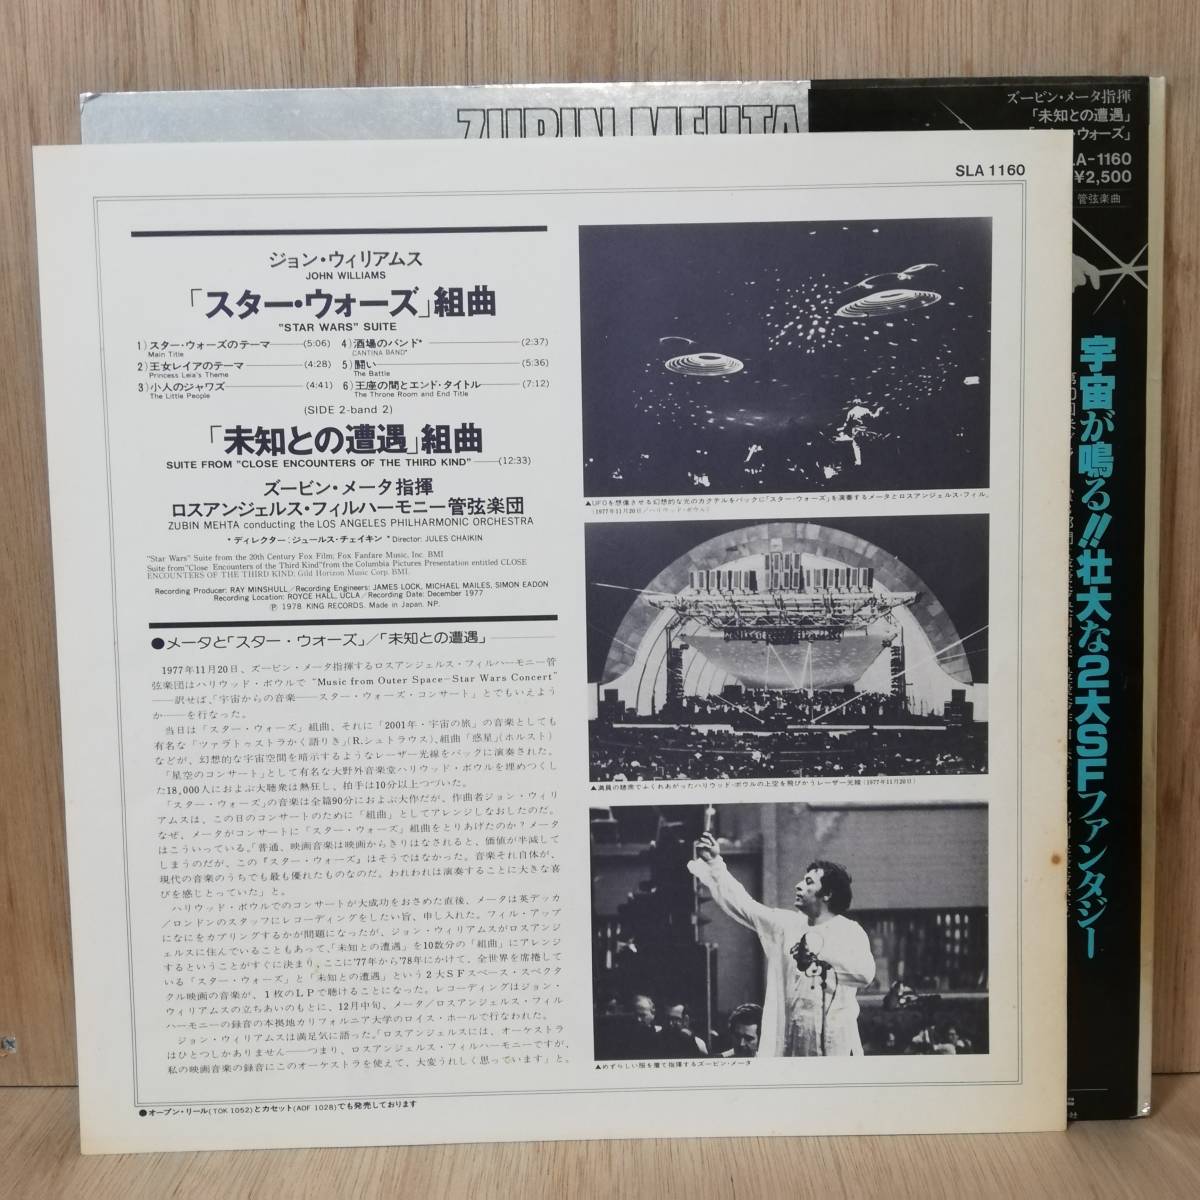 【LP】Zubin Mehta Conducts Los Angeles Phil Suites From Star Wars And Close Encounters Of The Third Kind - SLA 1160 - *15_画像3